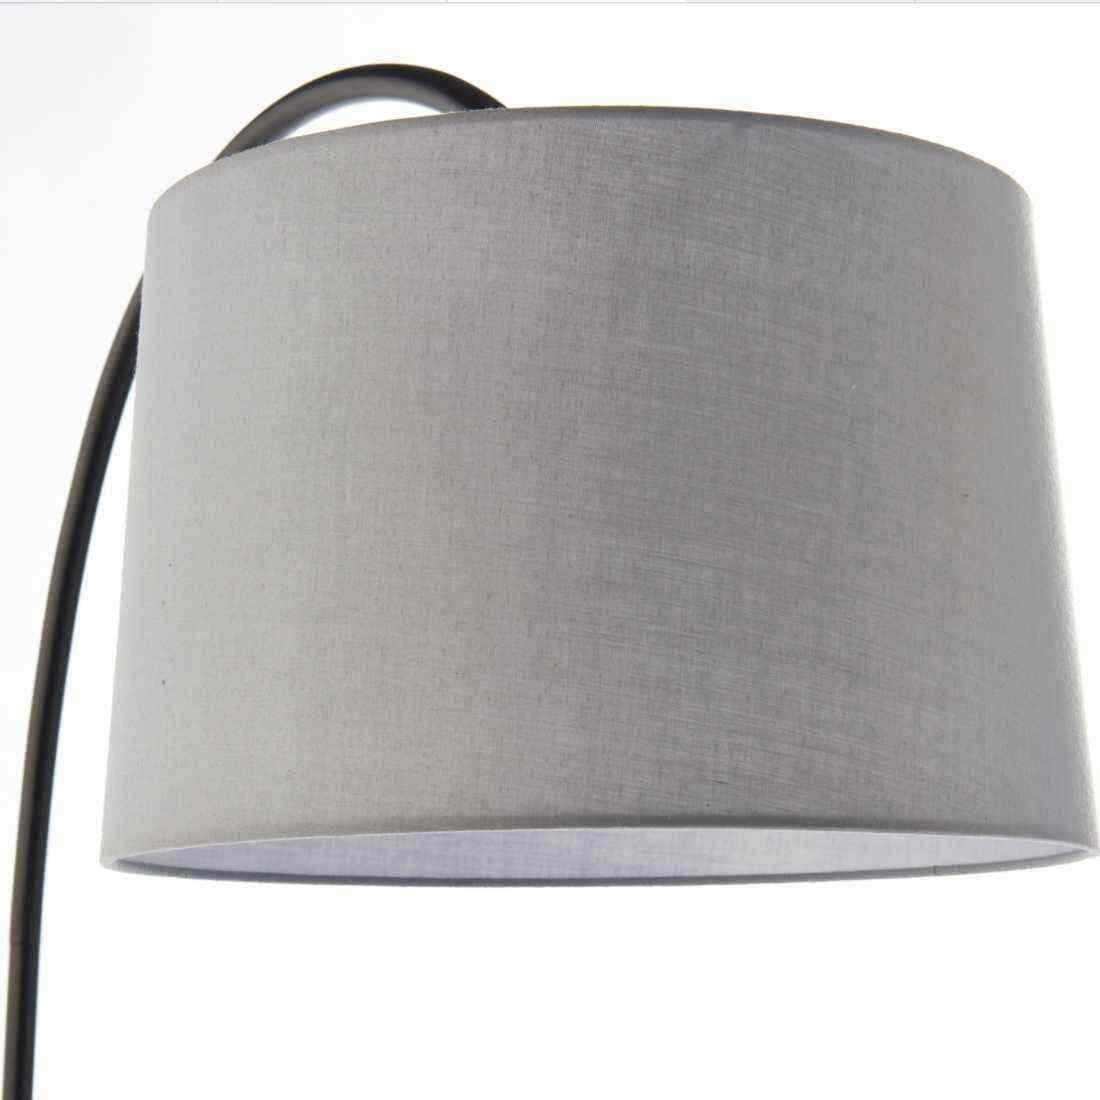 Black Swan Neck and Grey Shade Floor Lamp - The Farthing